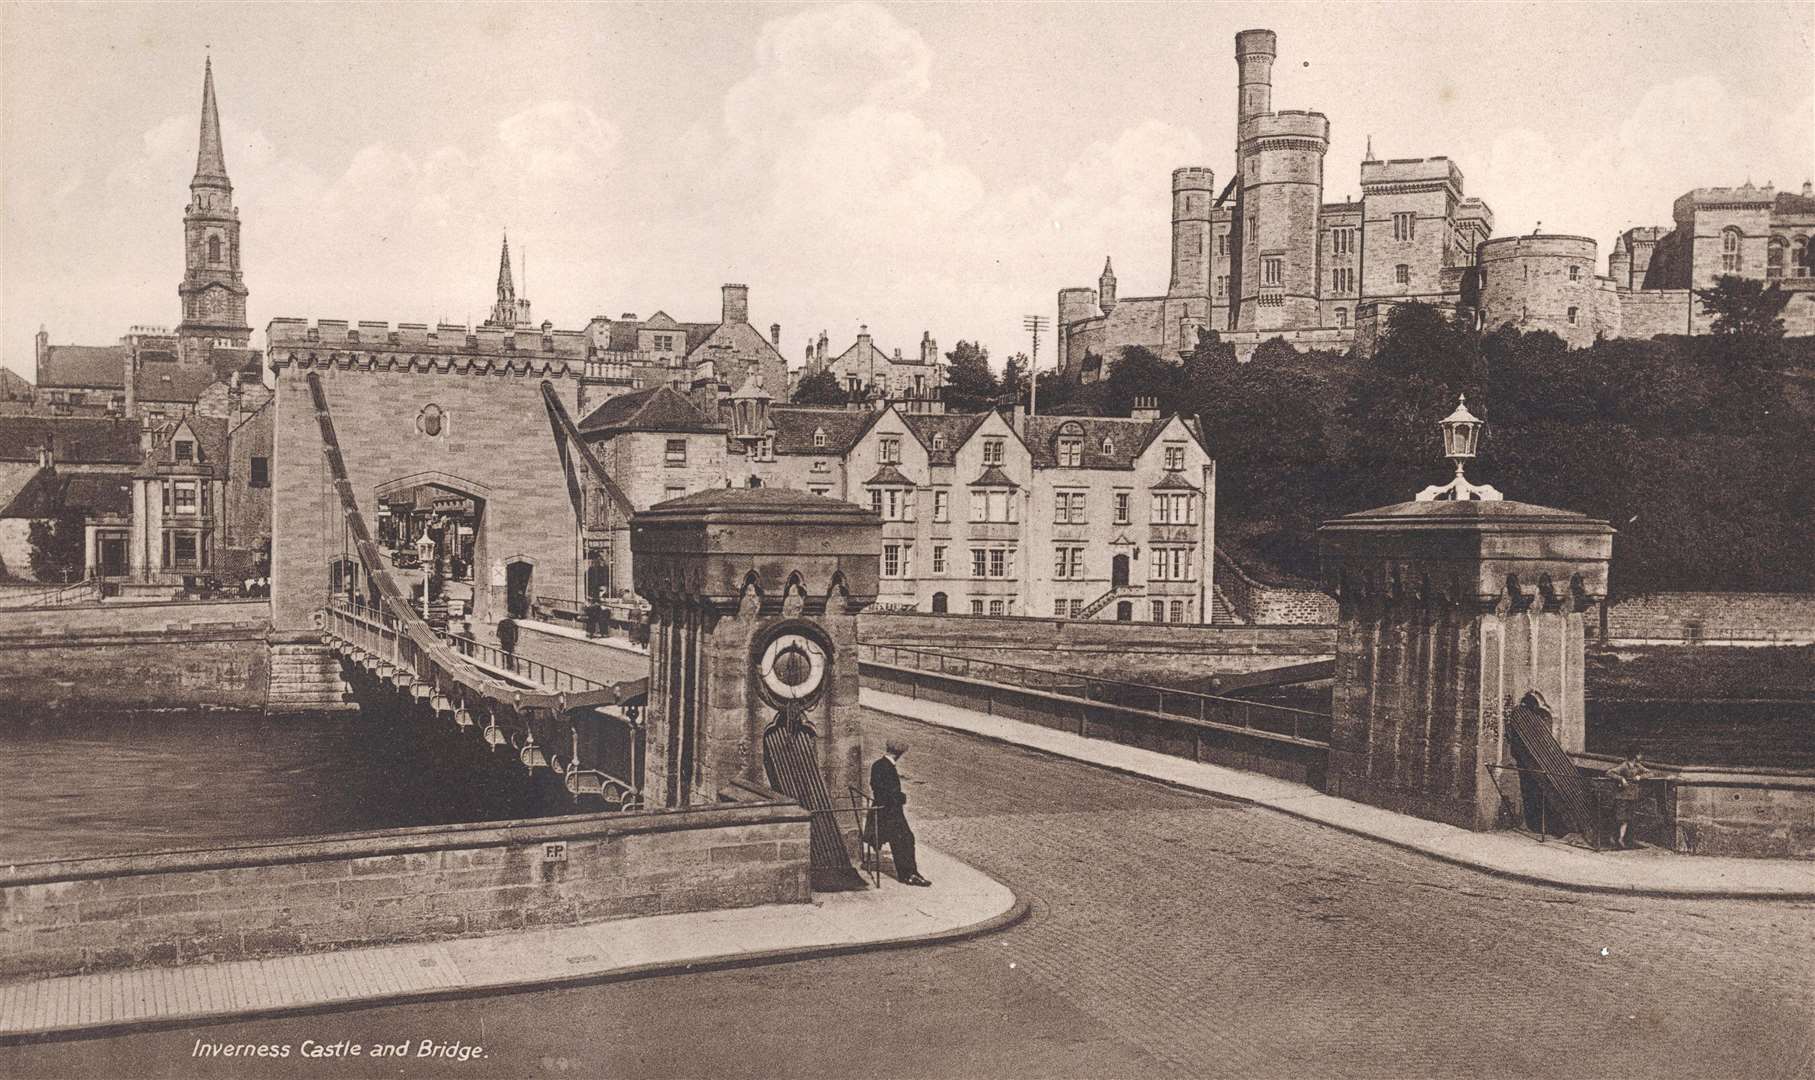 The bridge which ultimately replaced the damaged 17th century crossing, but was itself demolished and replaced by the modern crossing in 1961.